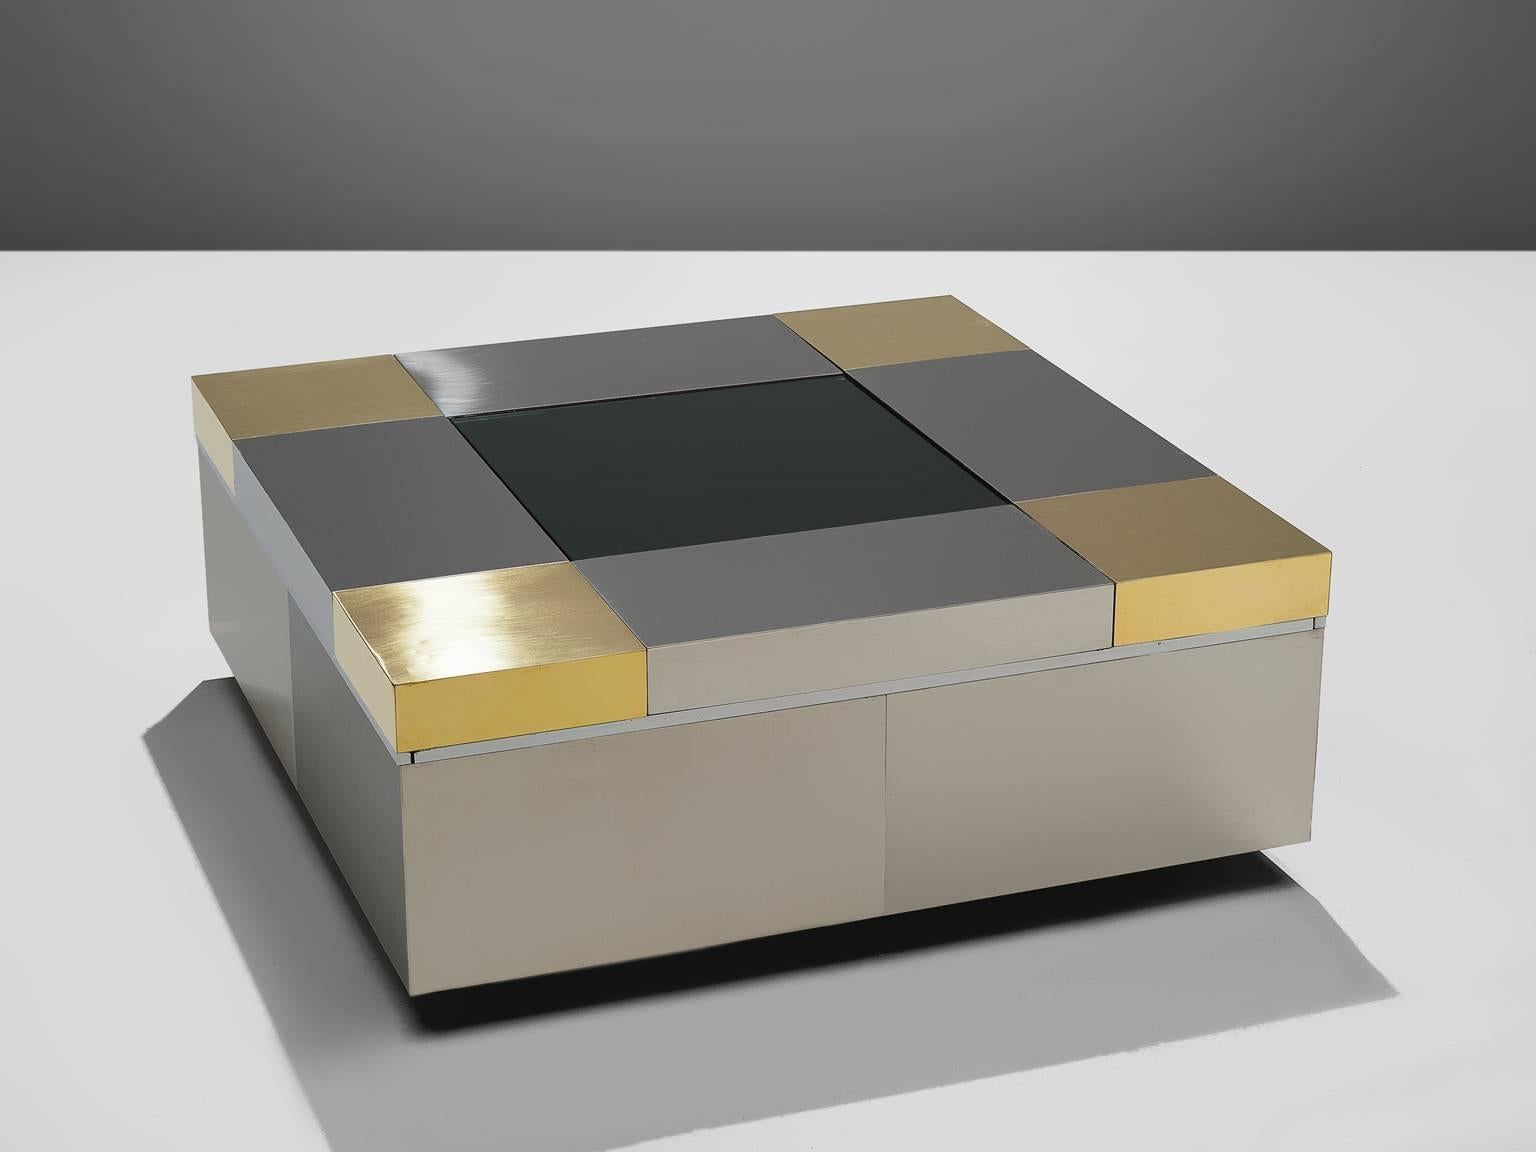 Coffee table, steel and brass, 1970s, Italy.

This cocktail table is designed in the style of Willy Rizzo. The coffee table features particular design aesthetics of postmodern Italian design that features traits of the design of Gabriella Crespi. It